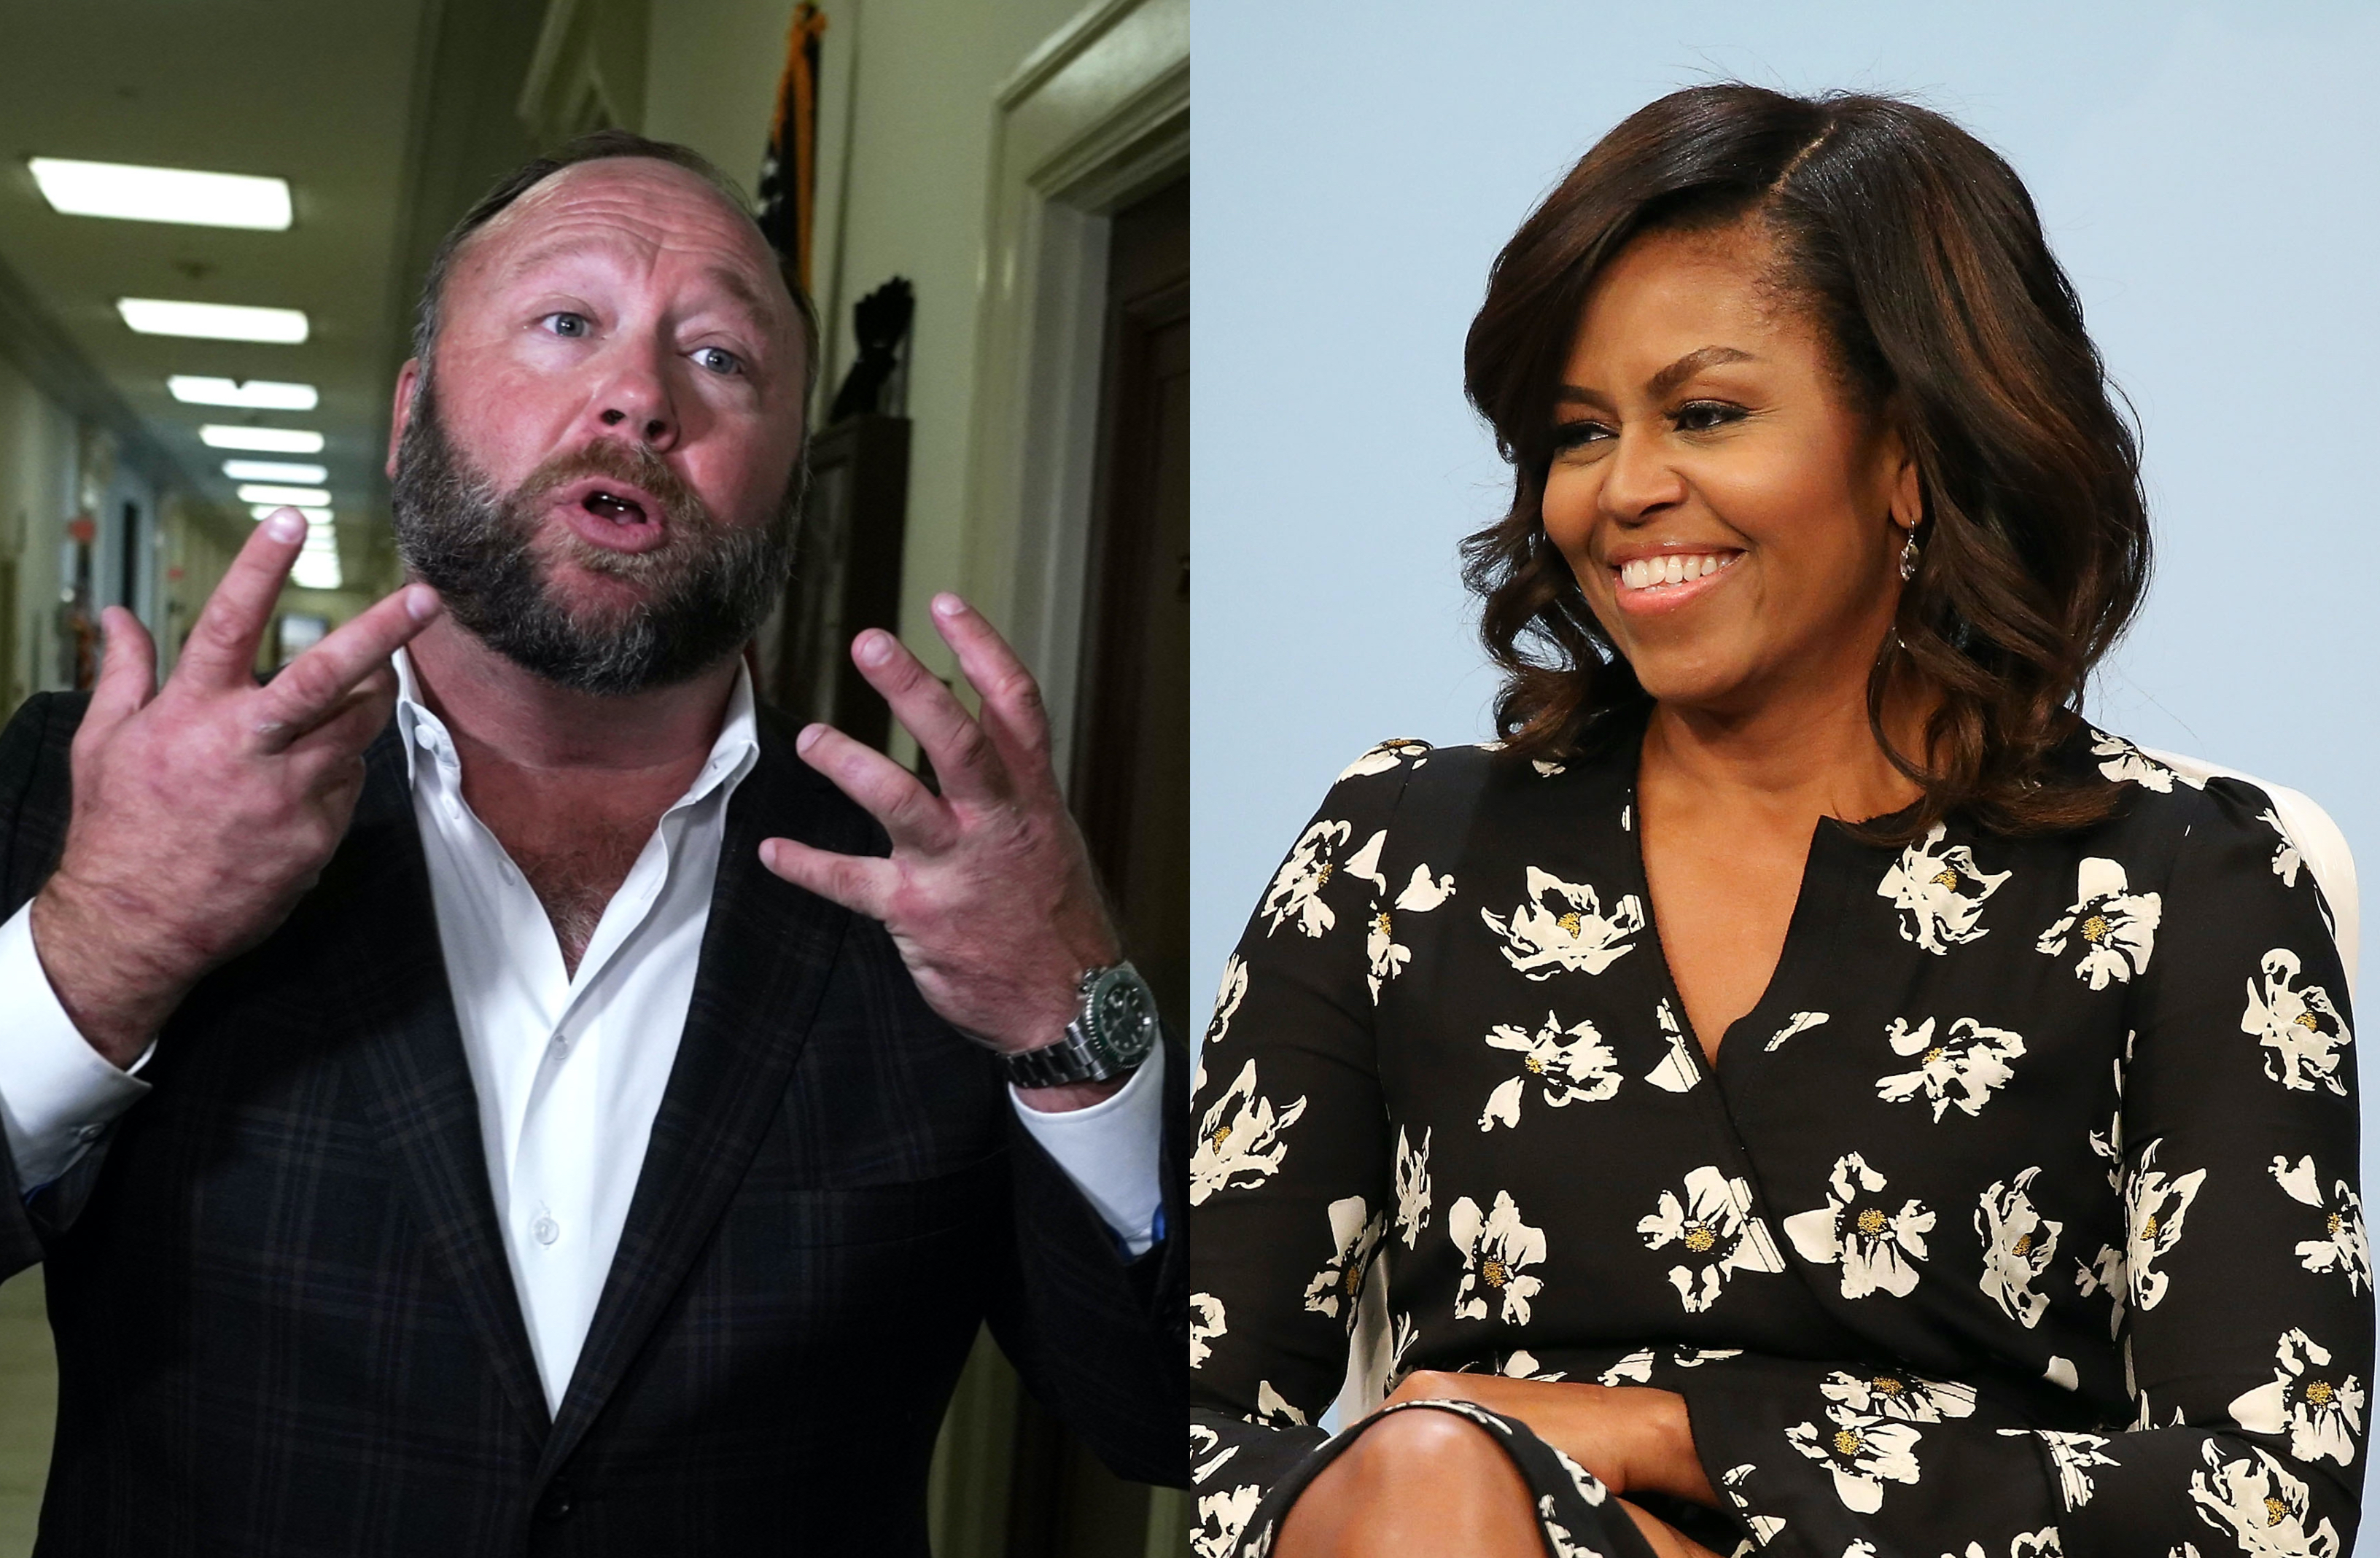 Michelle Obama Blowjob - Conspiracy theorist claims Michelle Obama is transgender. Yes, really